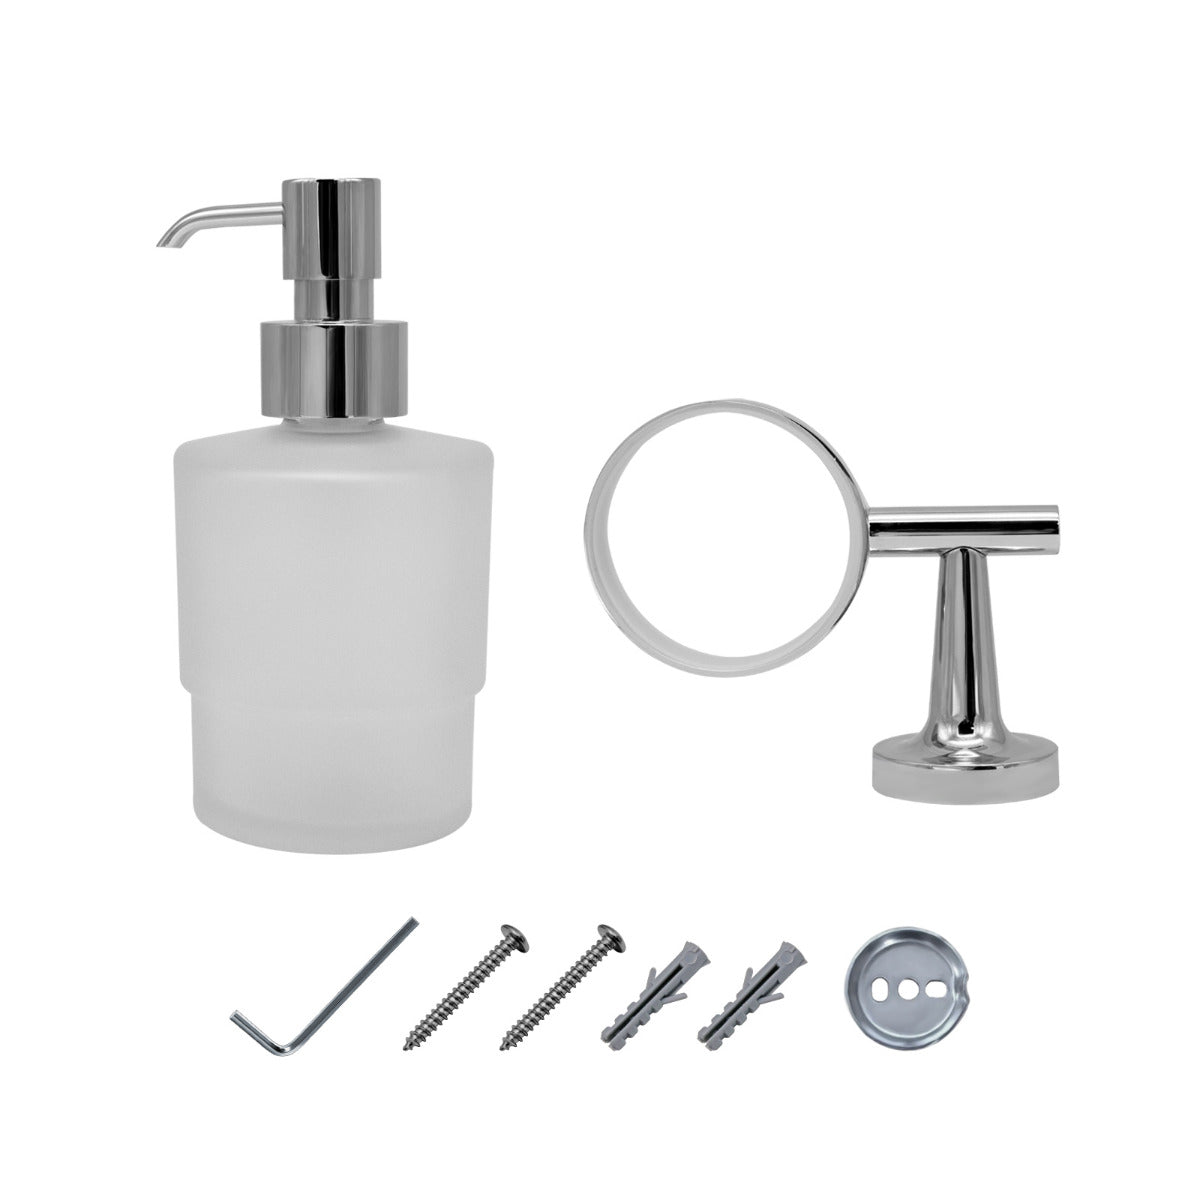 JassferryJASSFERRY Wall Mounted Soap Dispenser and Holder Frosted Glass Lotion HoldersSoap Dispenser